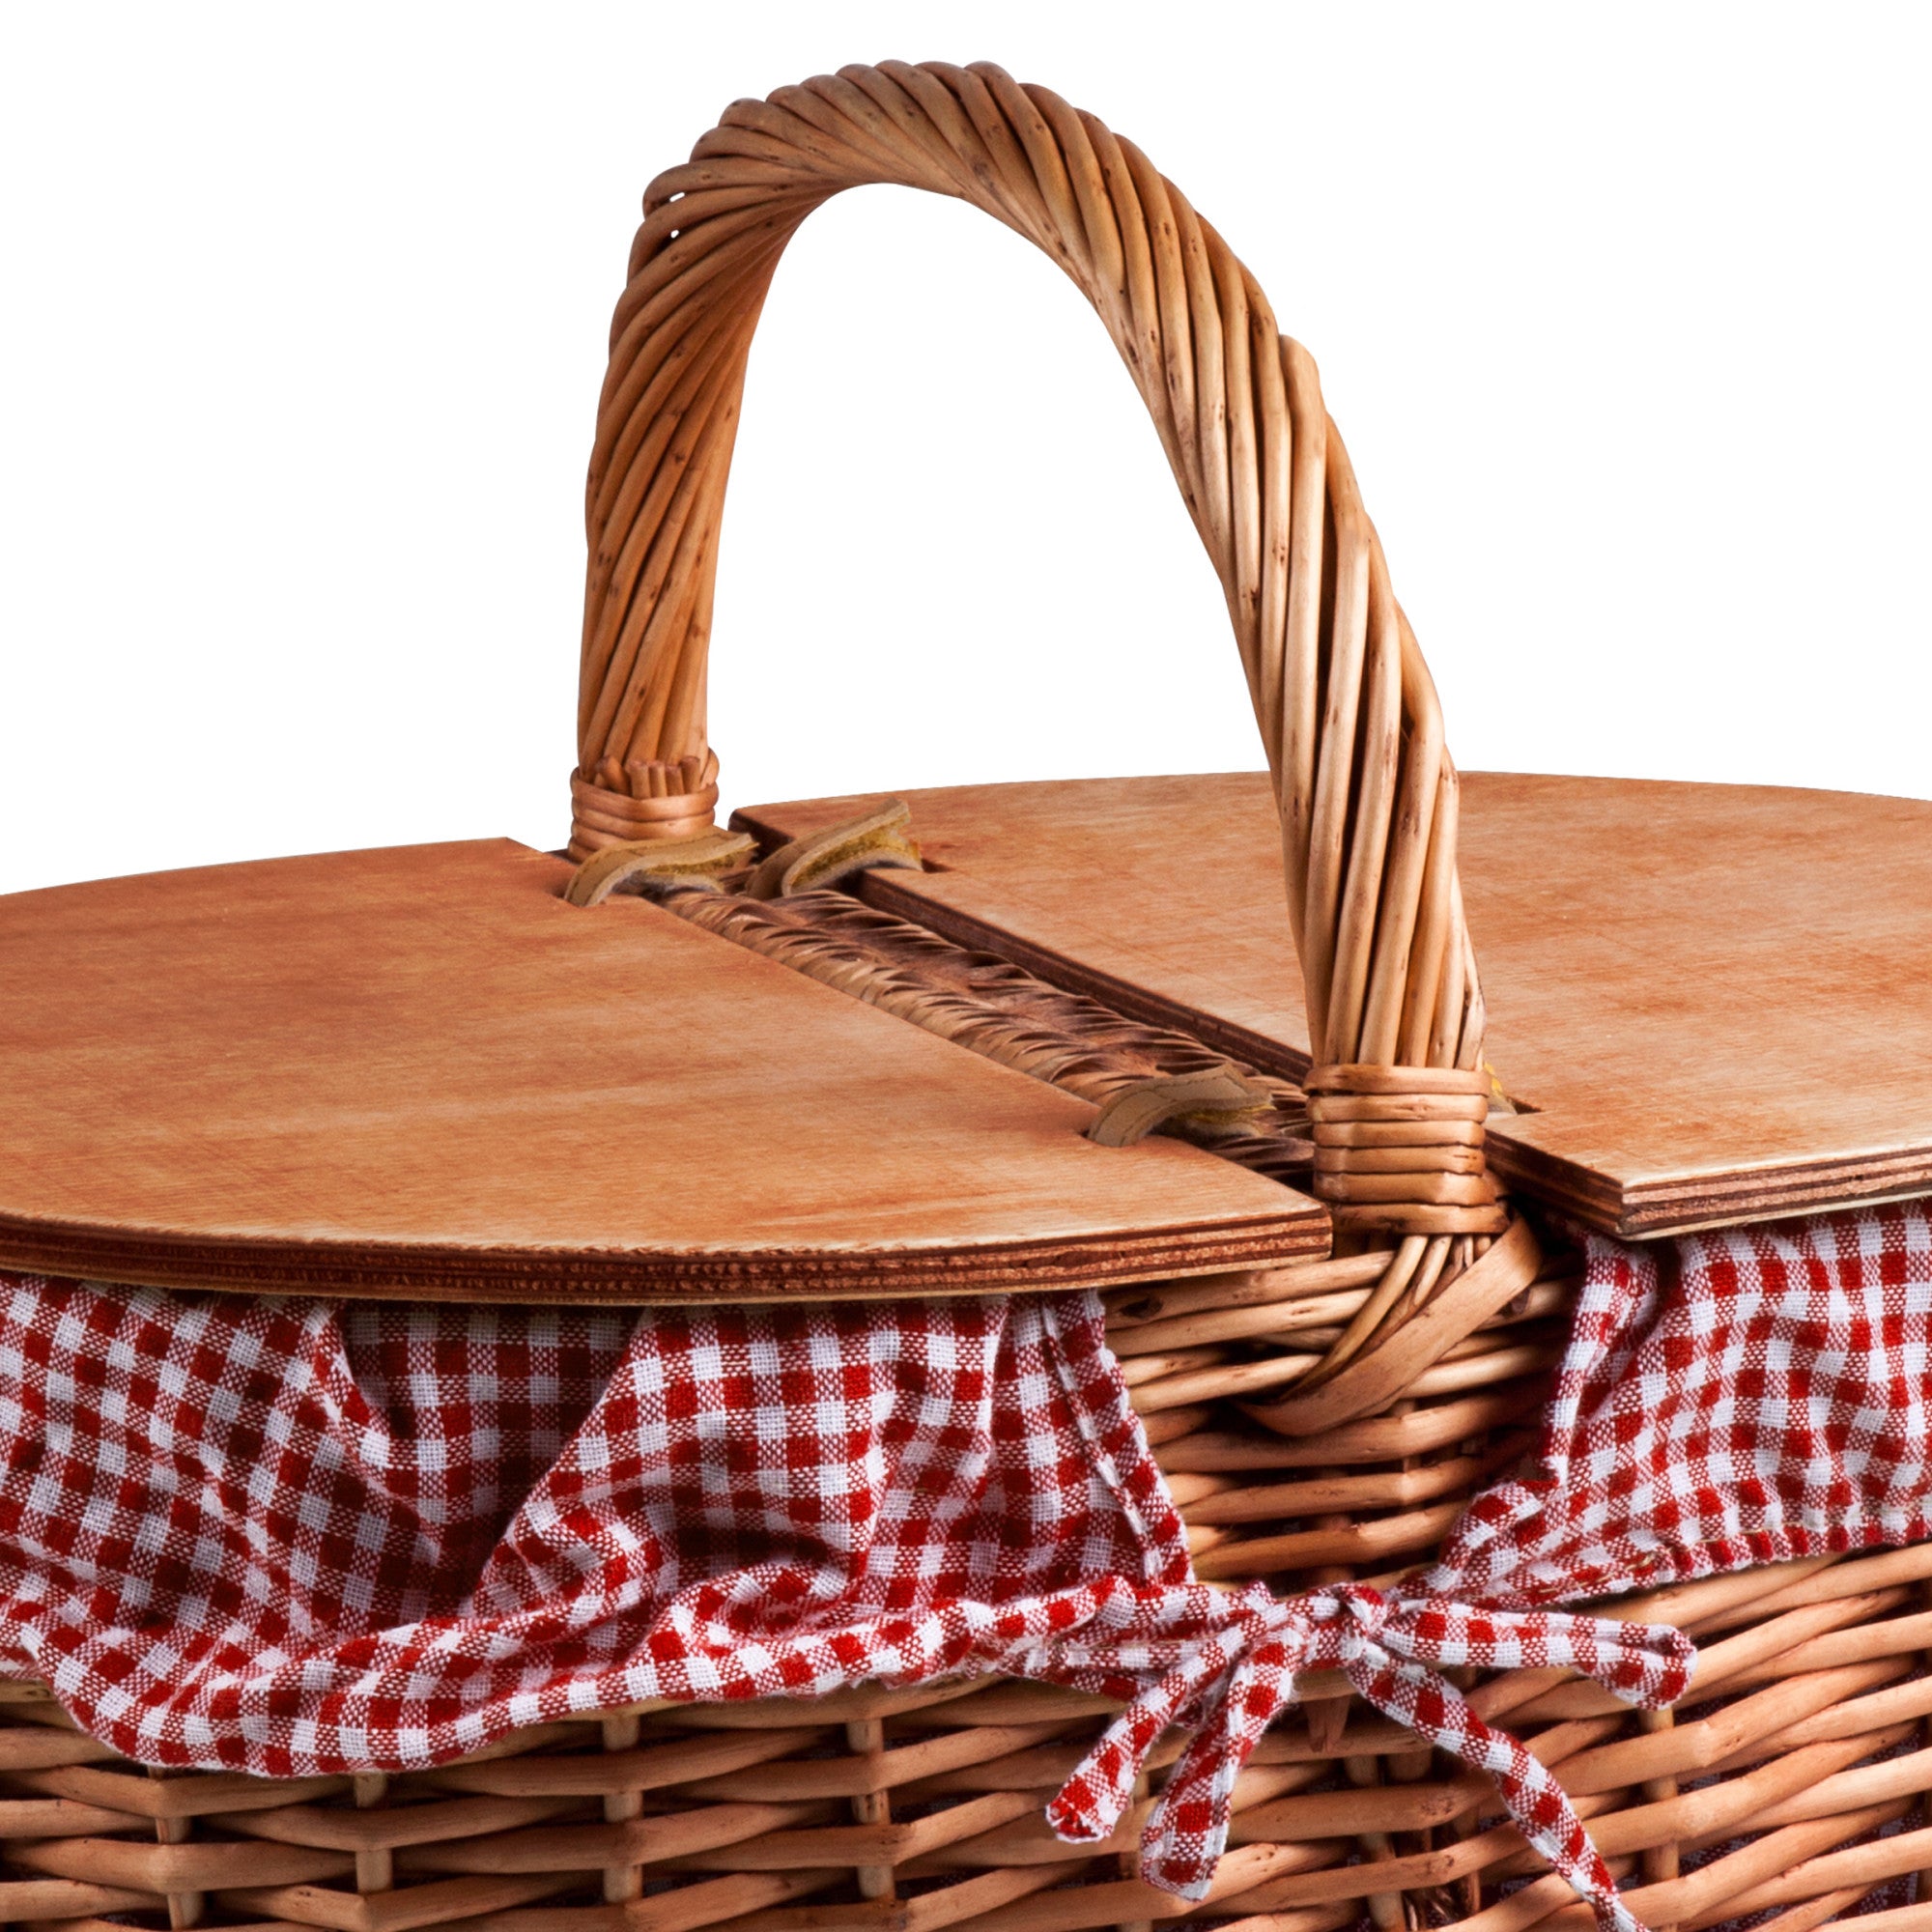 Chicago Cubs - Country Picnic Basket